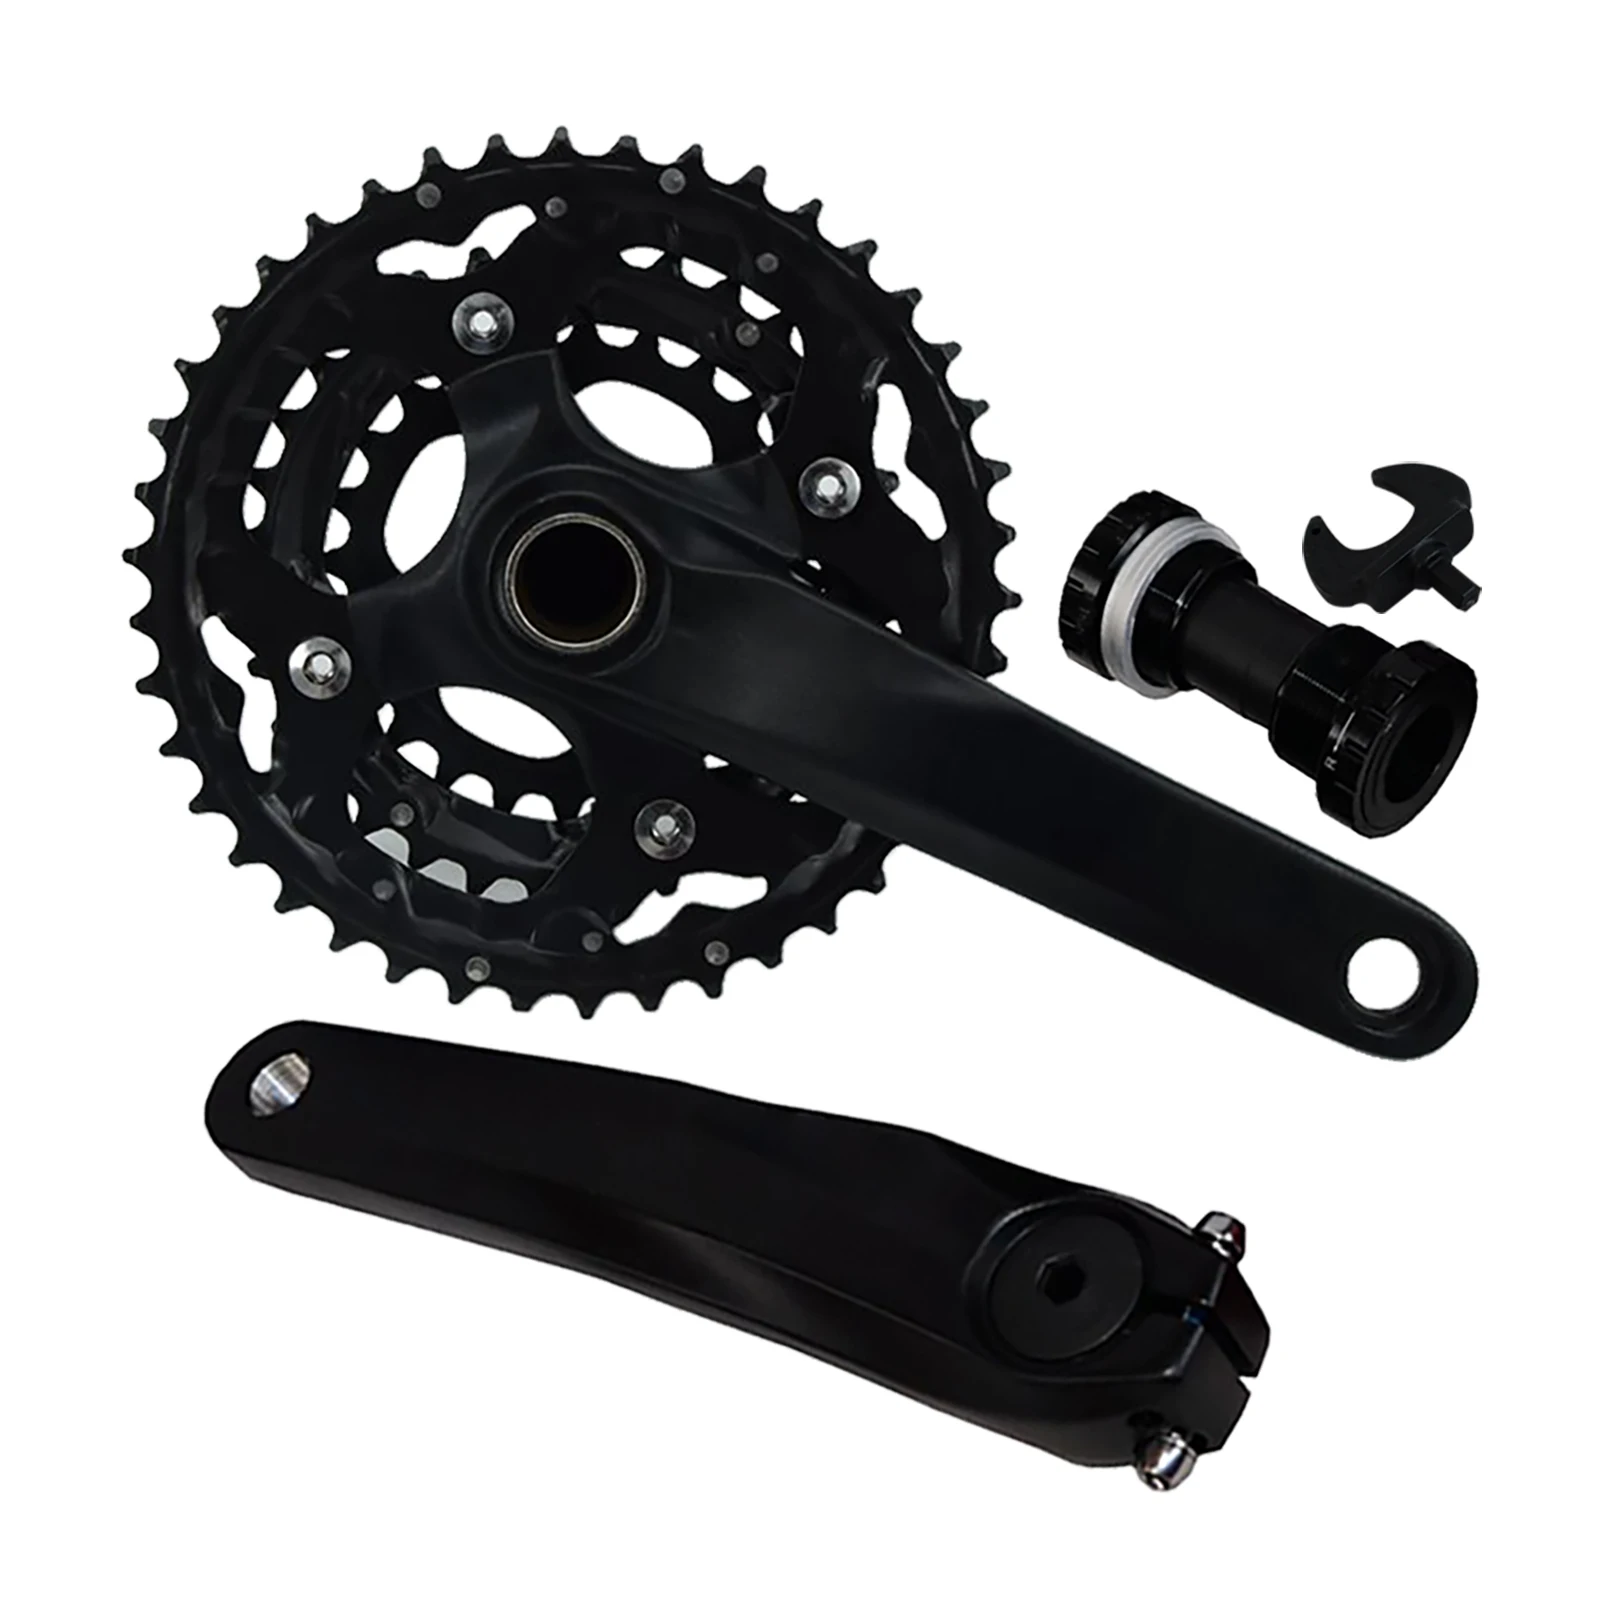 

Repair Outdoor Sport 24T 32T 42T Bottom Bracket Replacement Part 30 Speed Cycling Aluminium Alloy Bicycle Crankset Mountain Bike